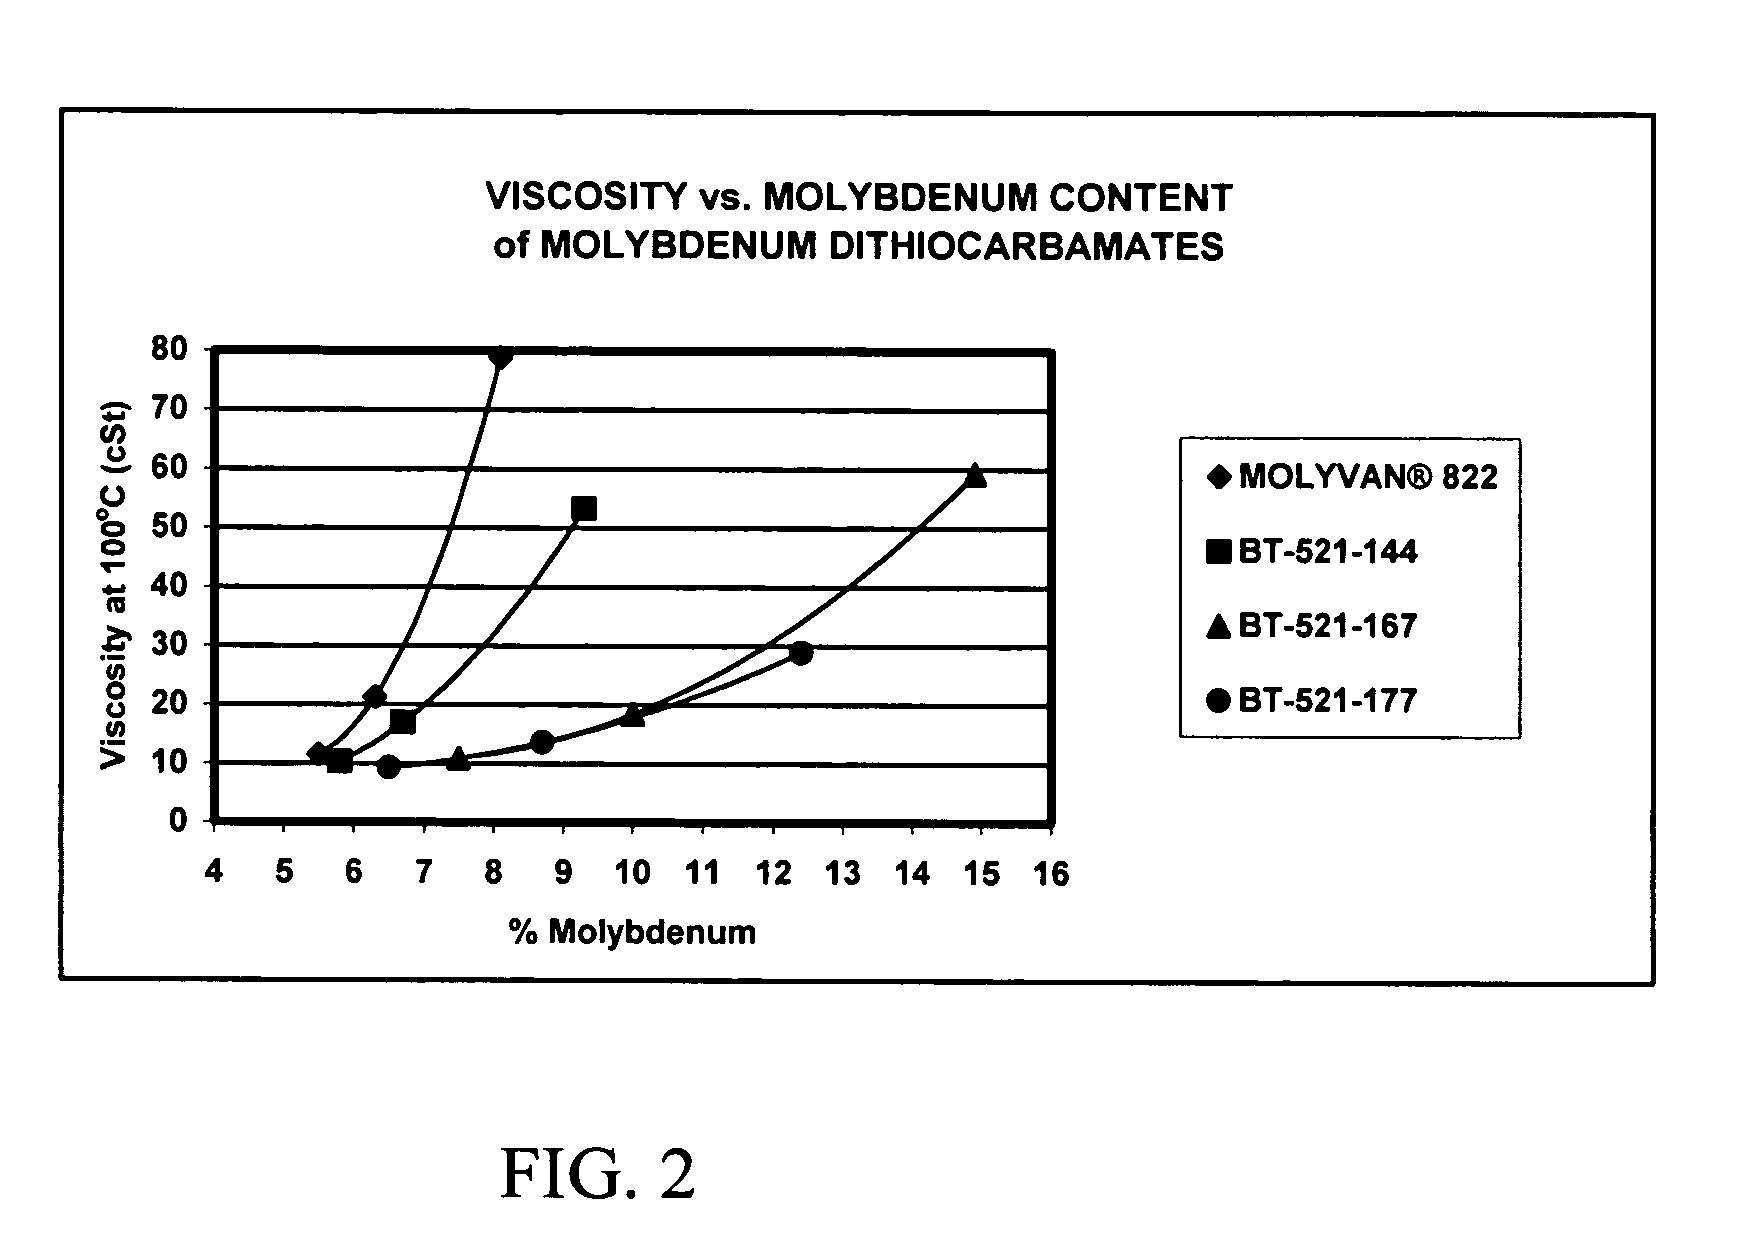 Molybdenum dialkyldithiocarbamate compositions and lubricating compositions containing the same